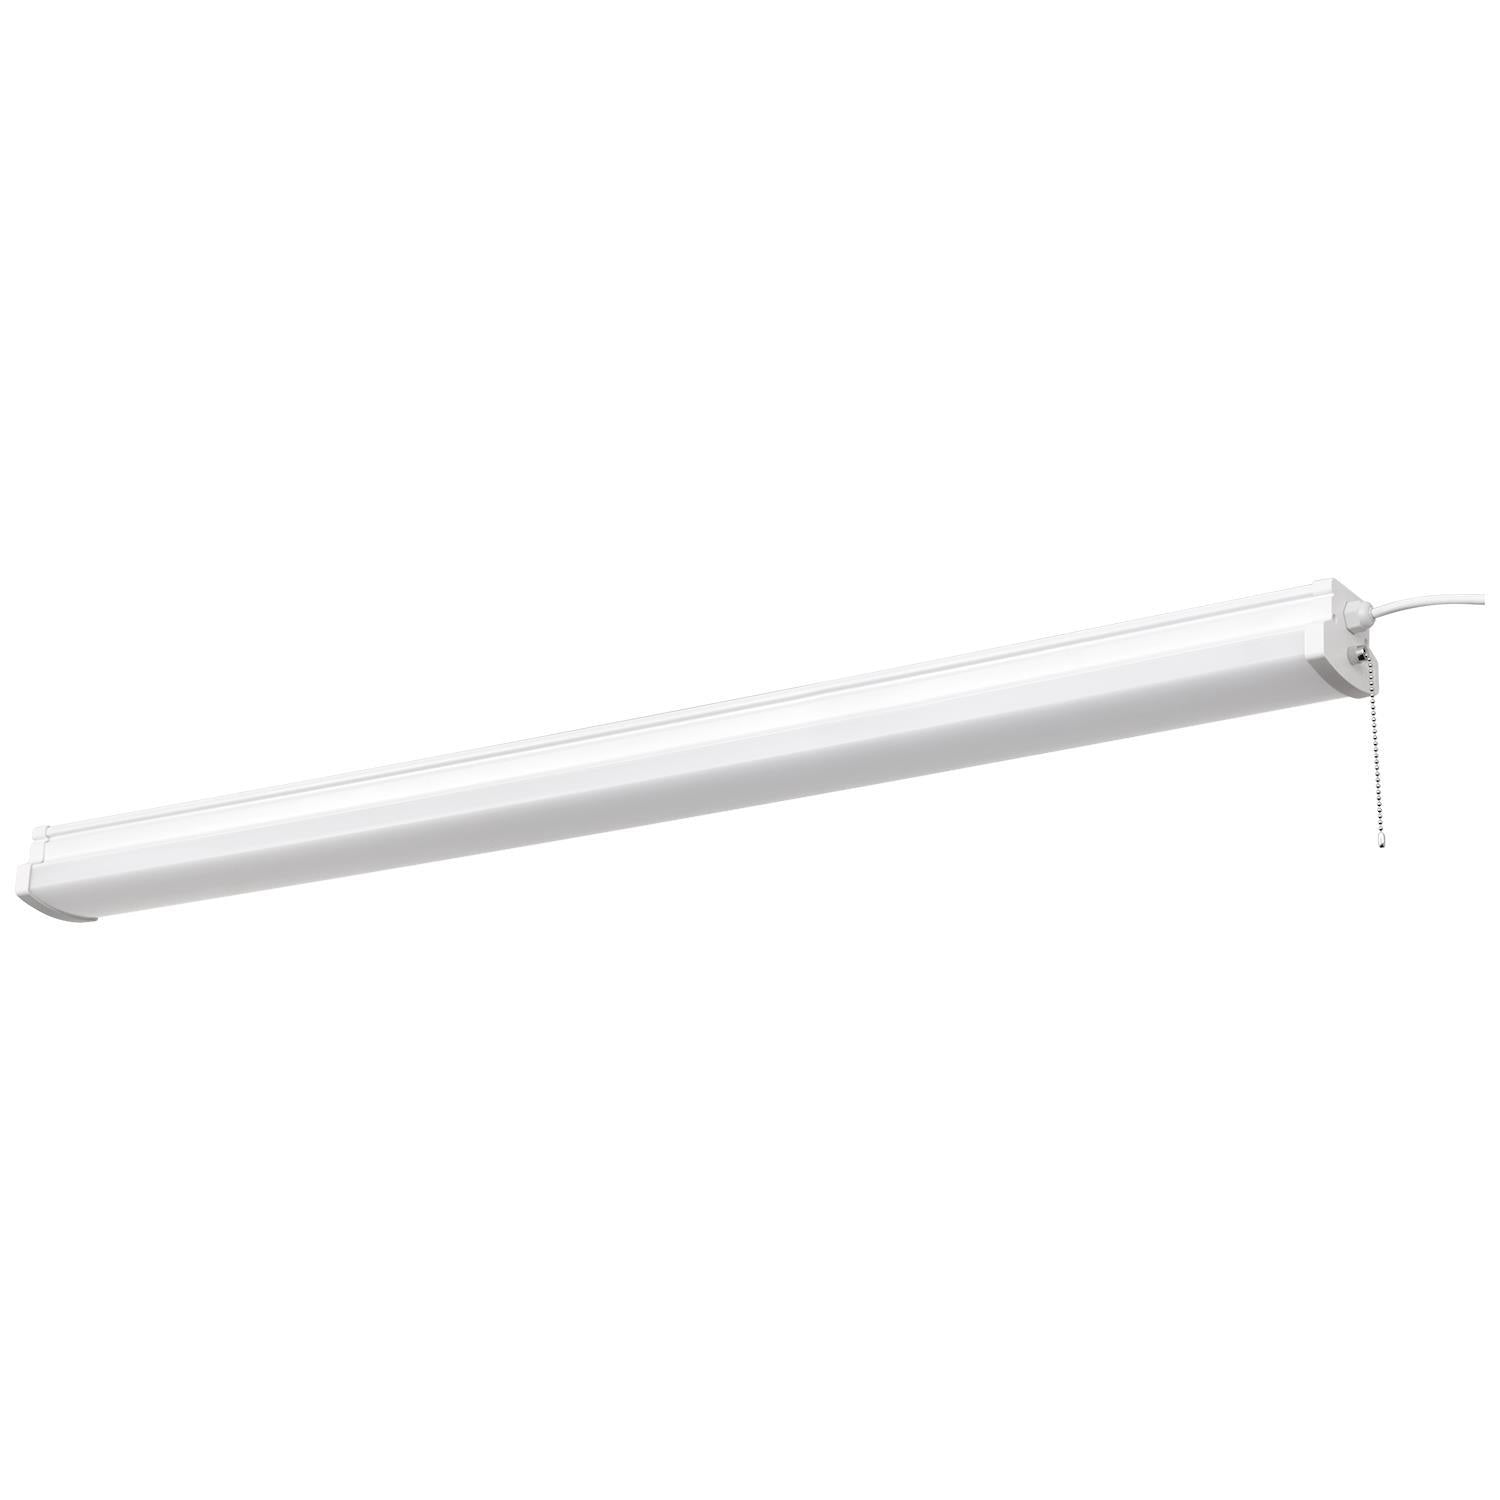 37W LED Linear Shop Light - 44.5-Inch - 4200Lm - 4000K - Plug-In - ETL Listed - IP65 - White Finish